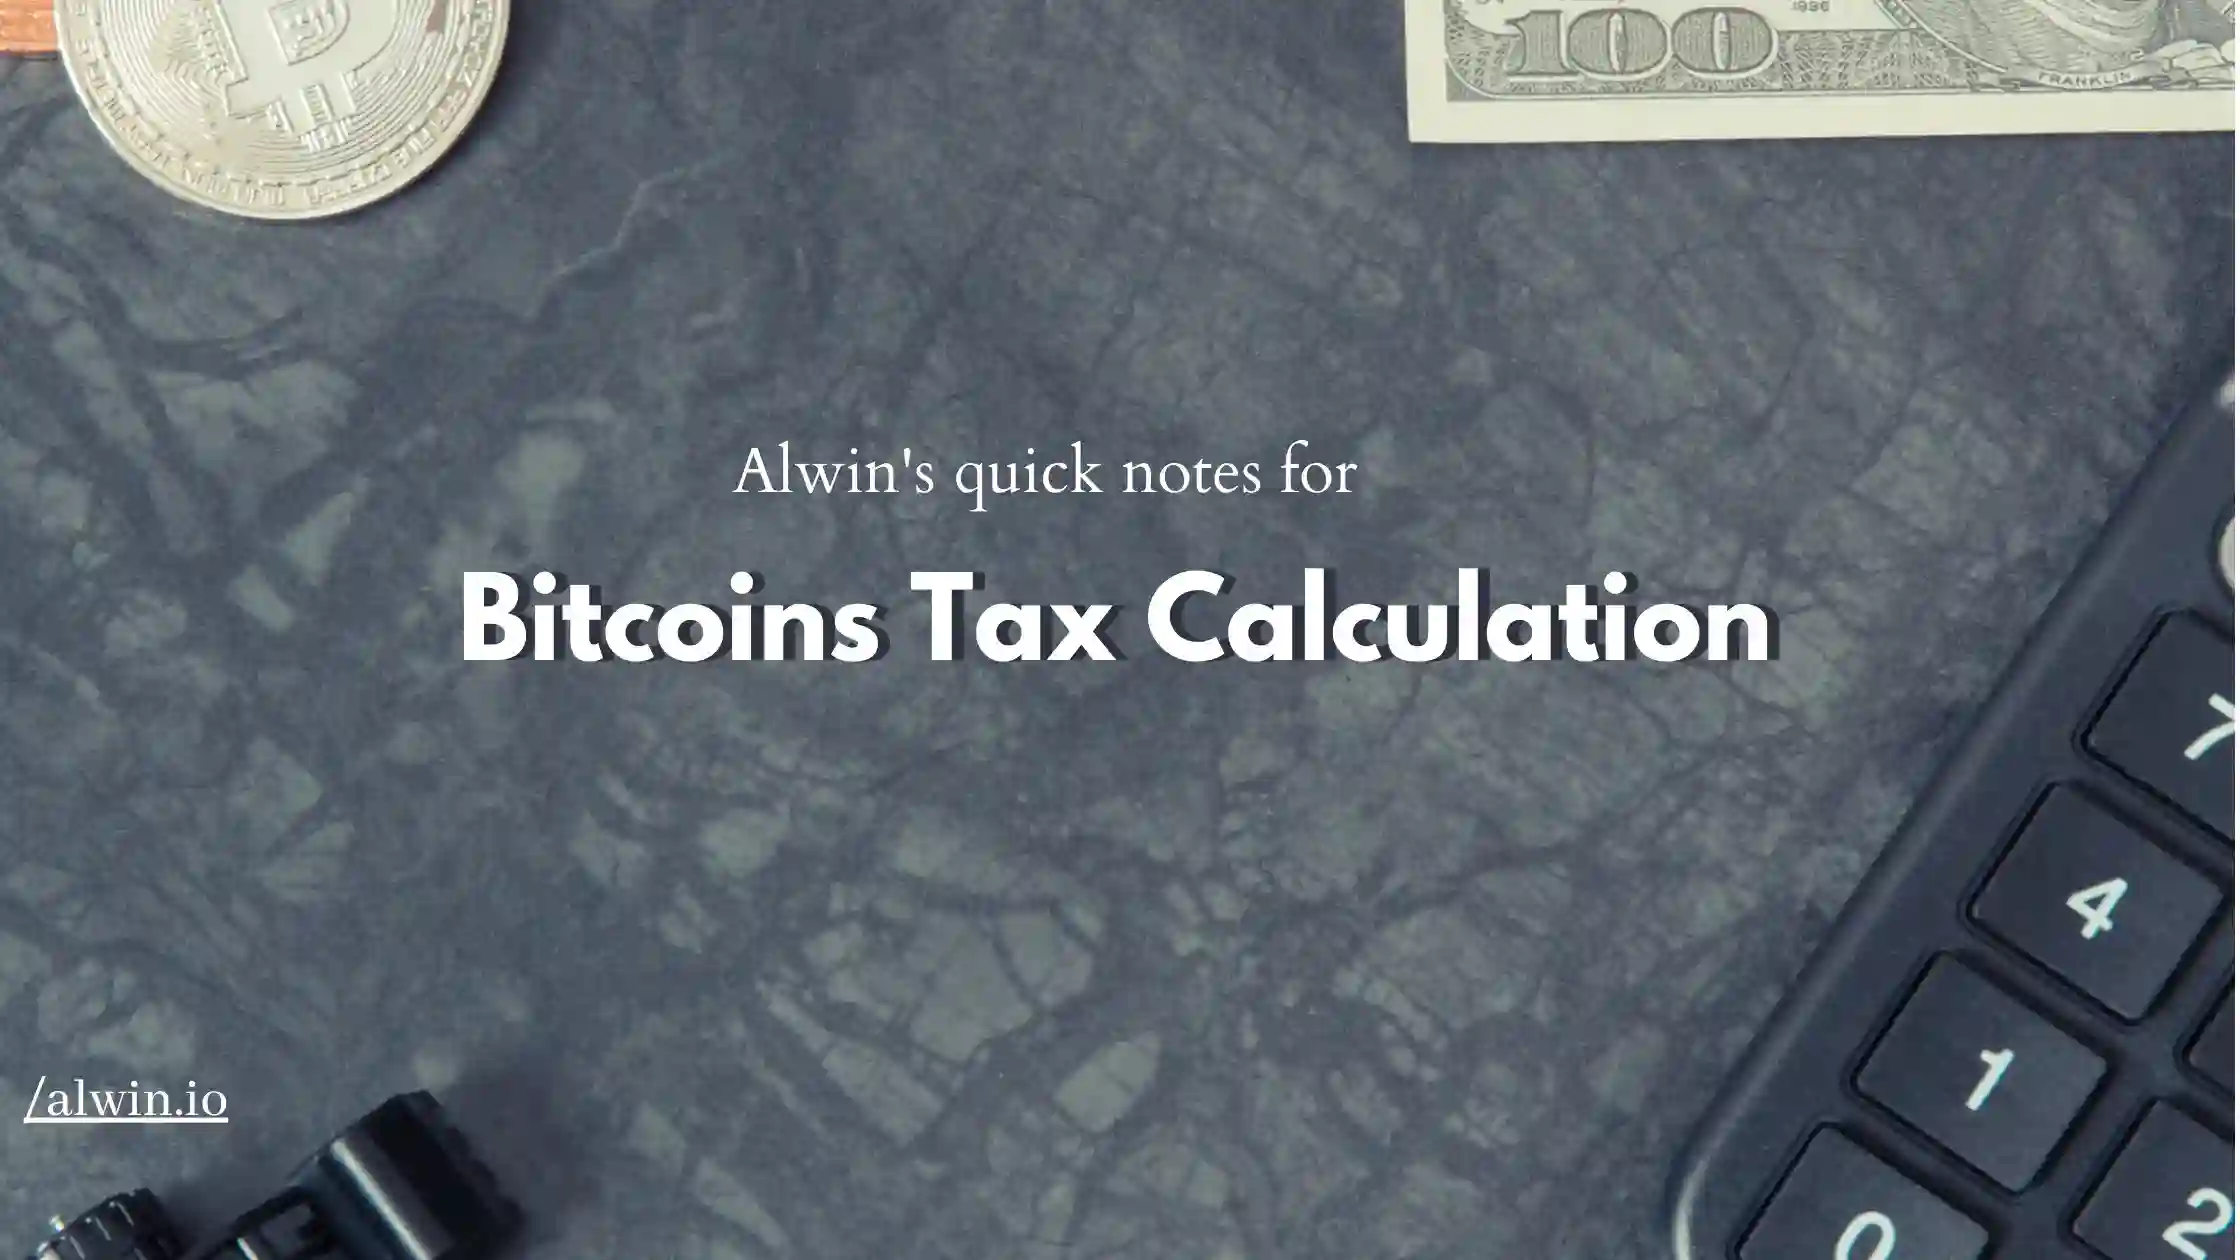 Quick Notes for Bitcoins Tax Calculation